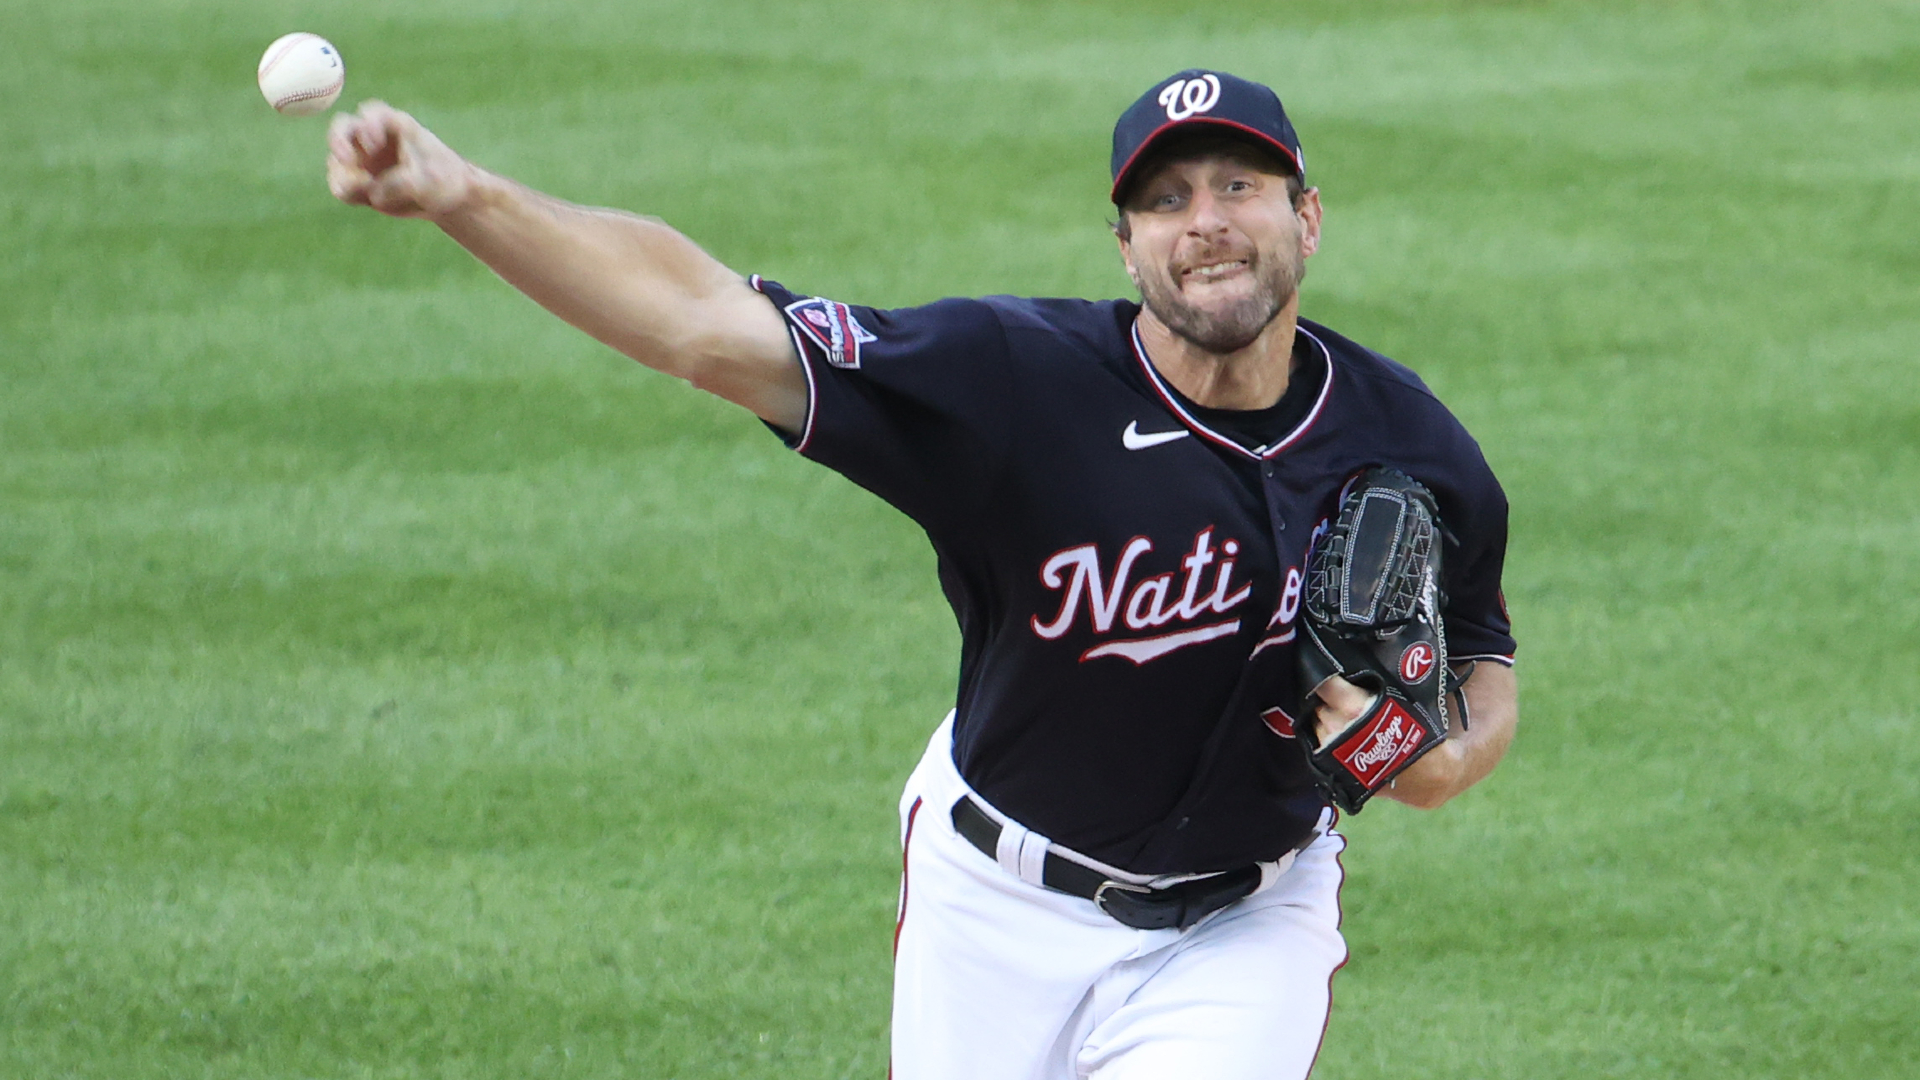 Max Scherzer's Fourth Career All-Star Game Start, by the Numbers